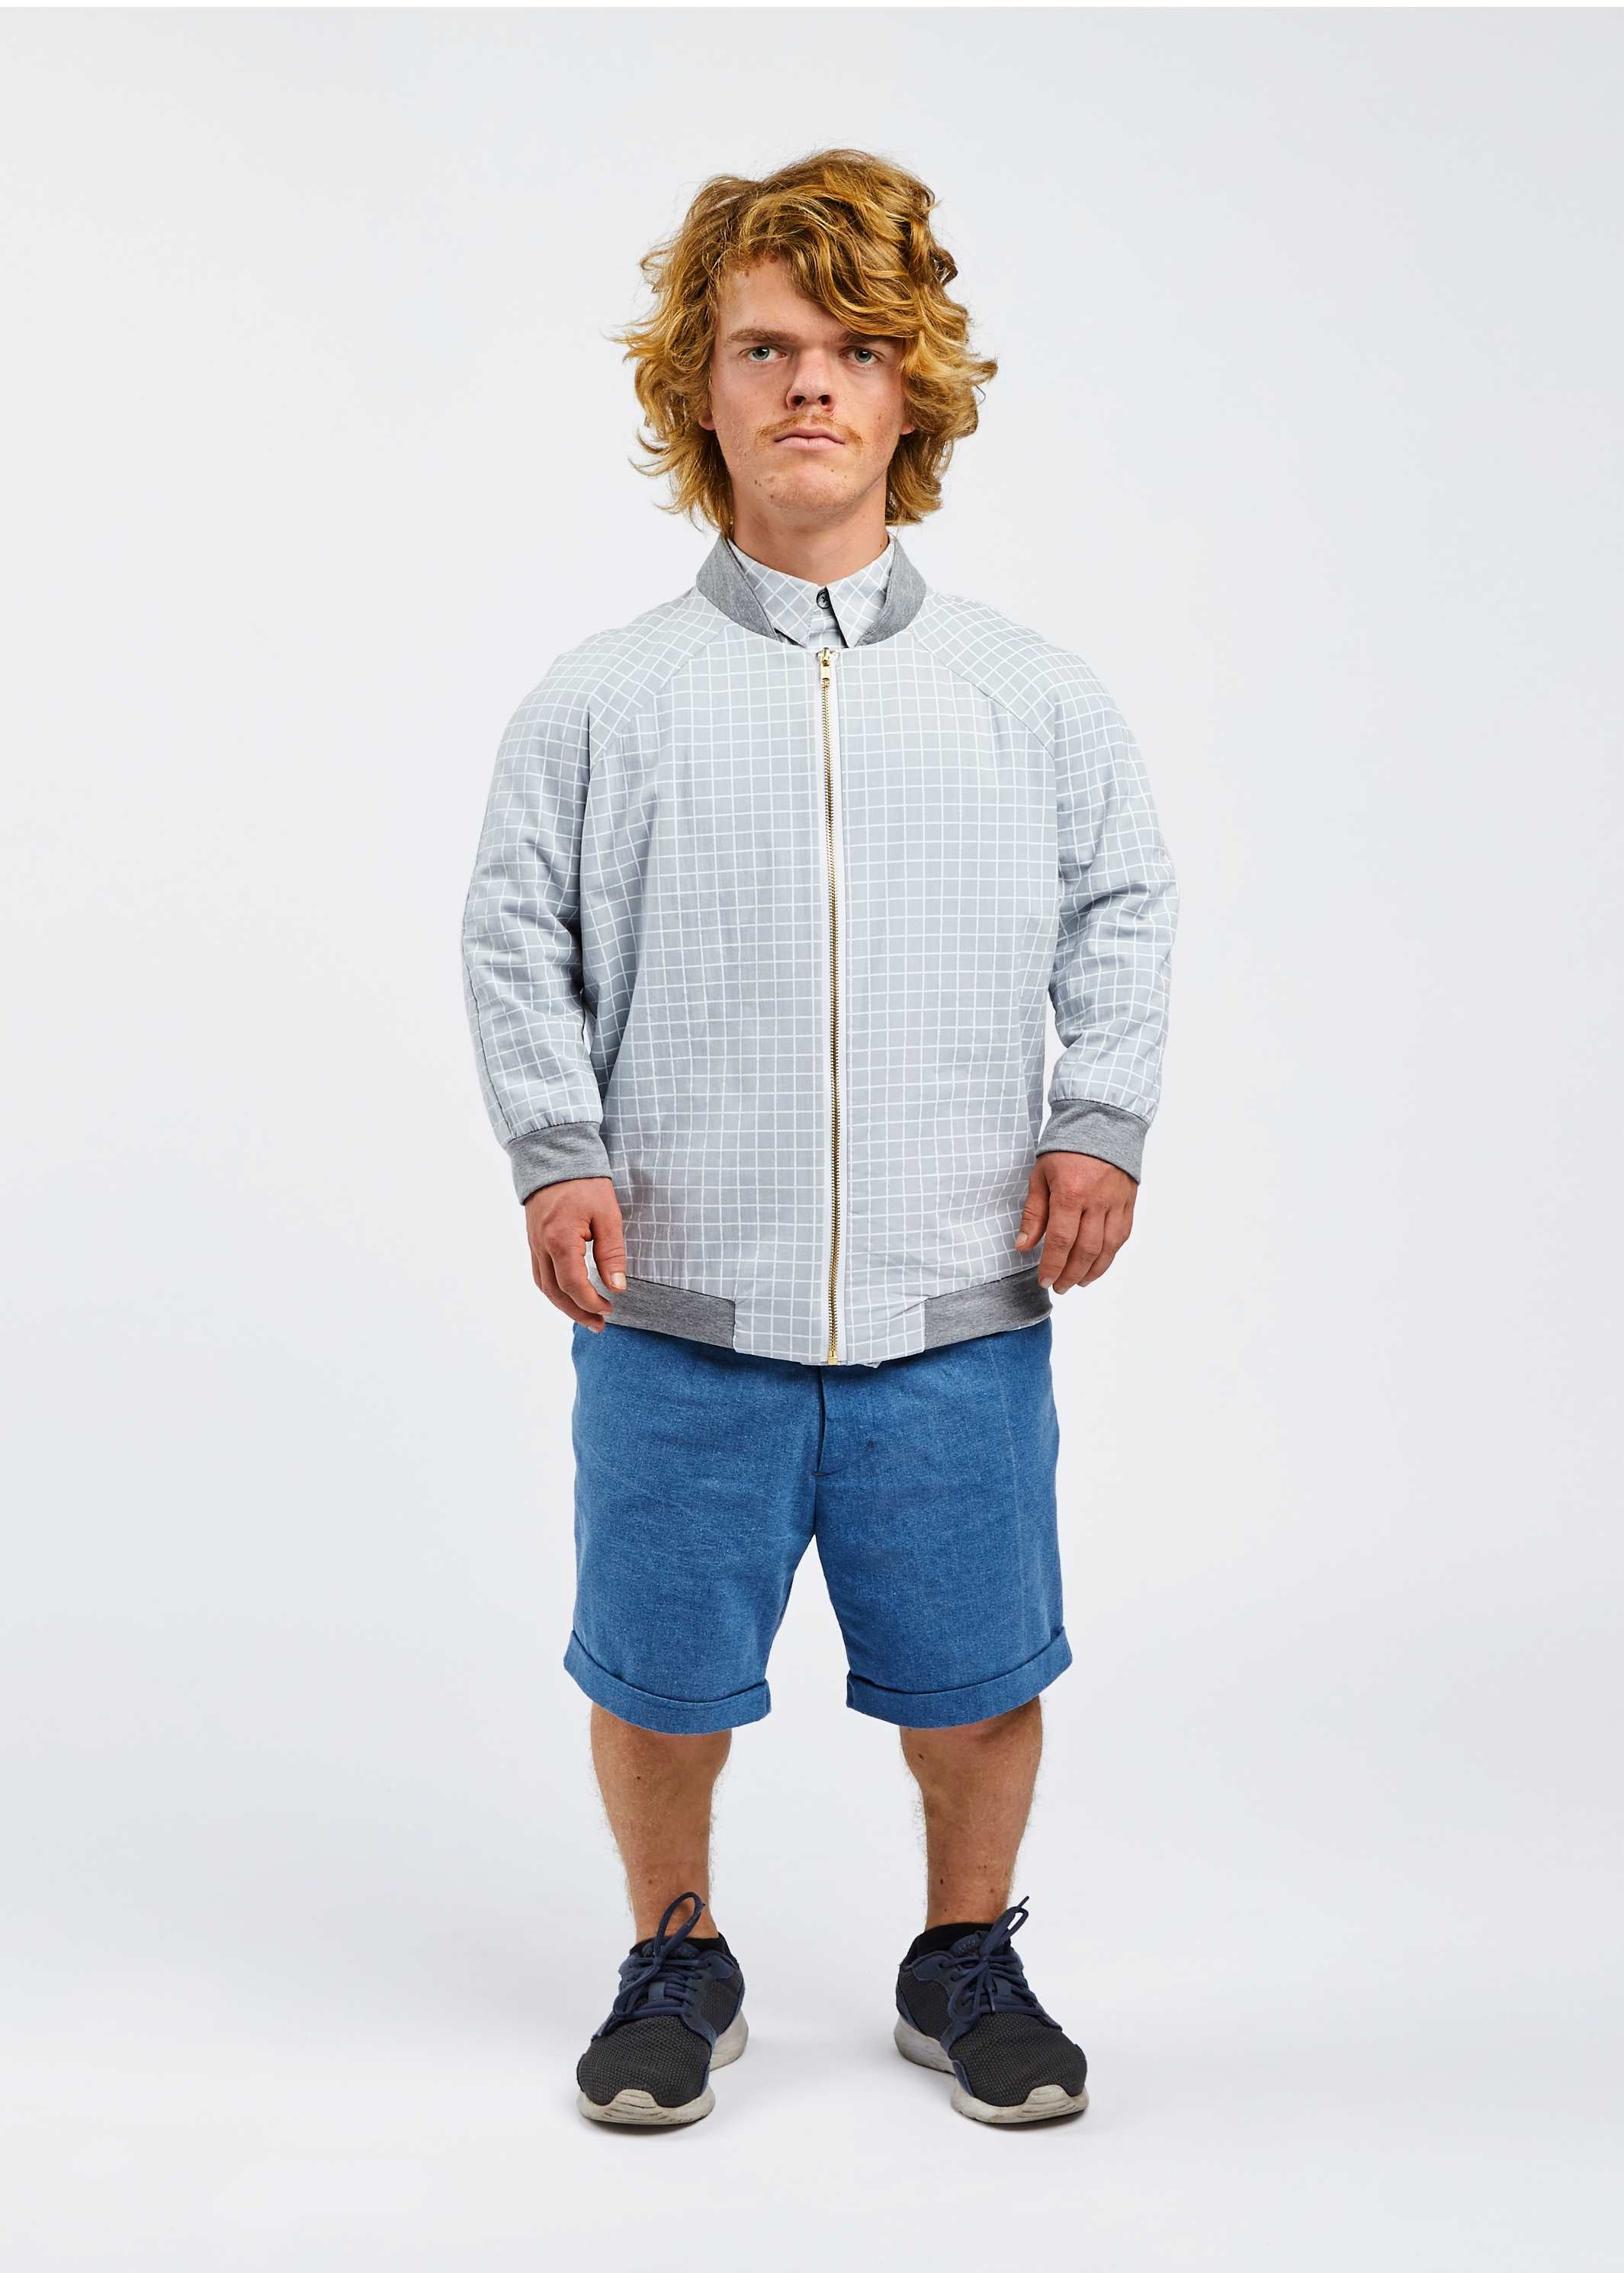 man with dwarfism wearing light blue grid design college jacket and blue shorts